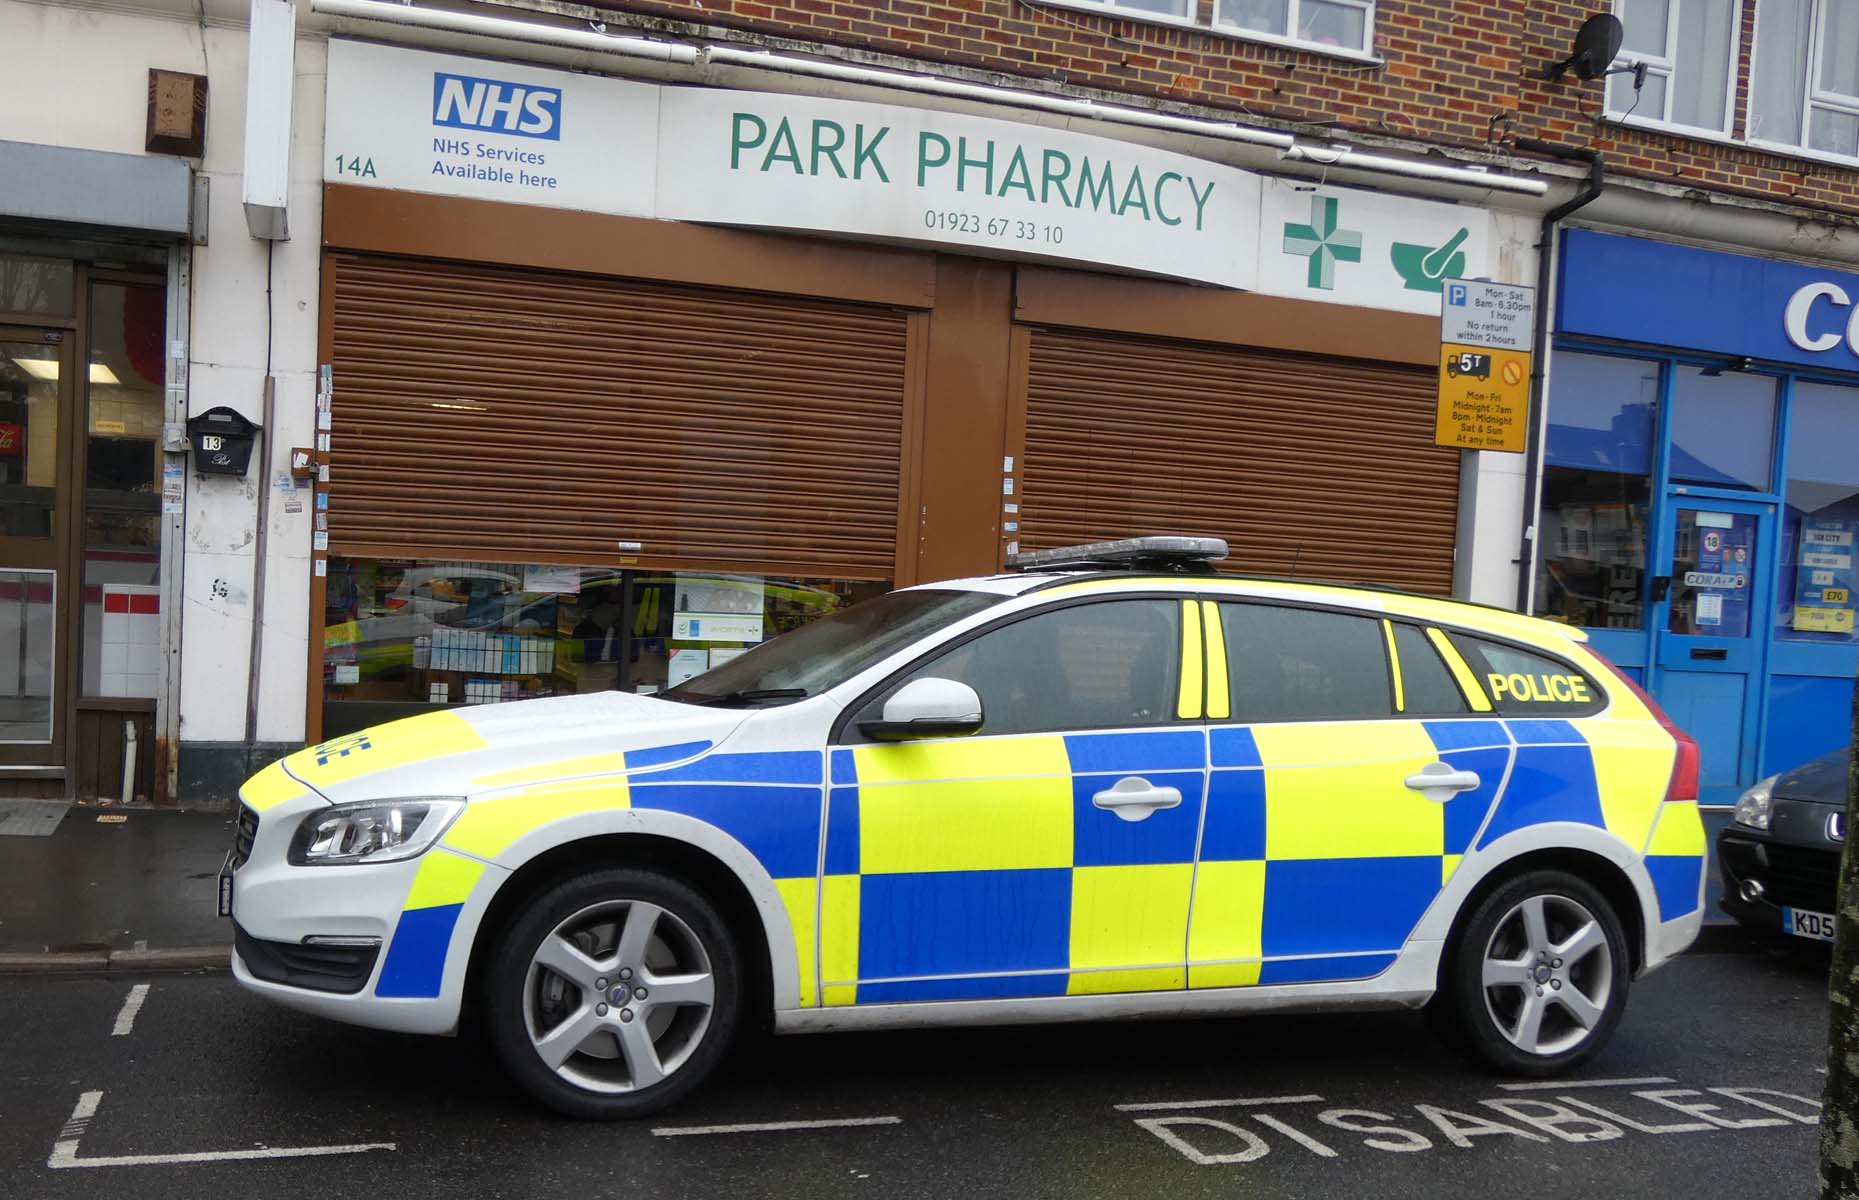 Staff threatened by a Gunman during armed robbery at Watford Pharmacy